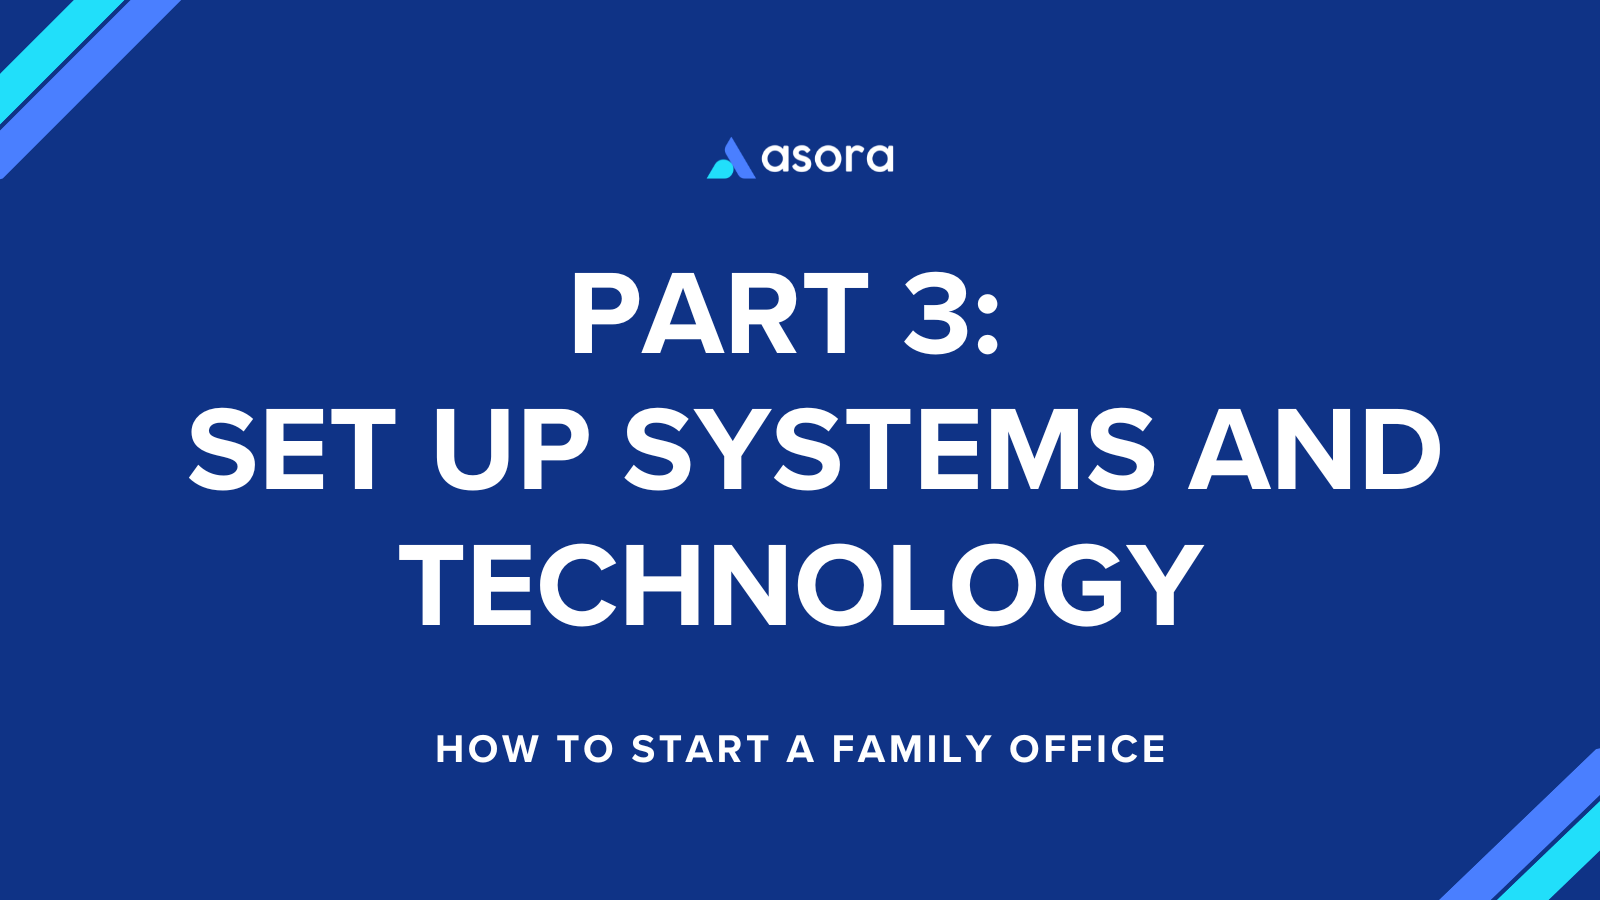 Part 3: Set Up Family Office Technology and Systems